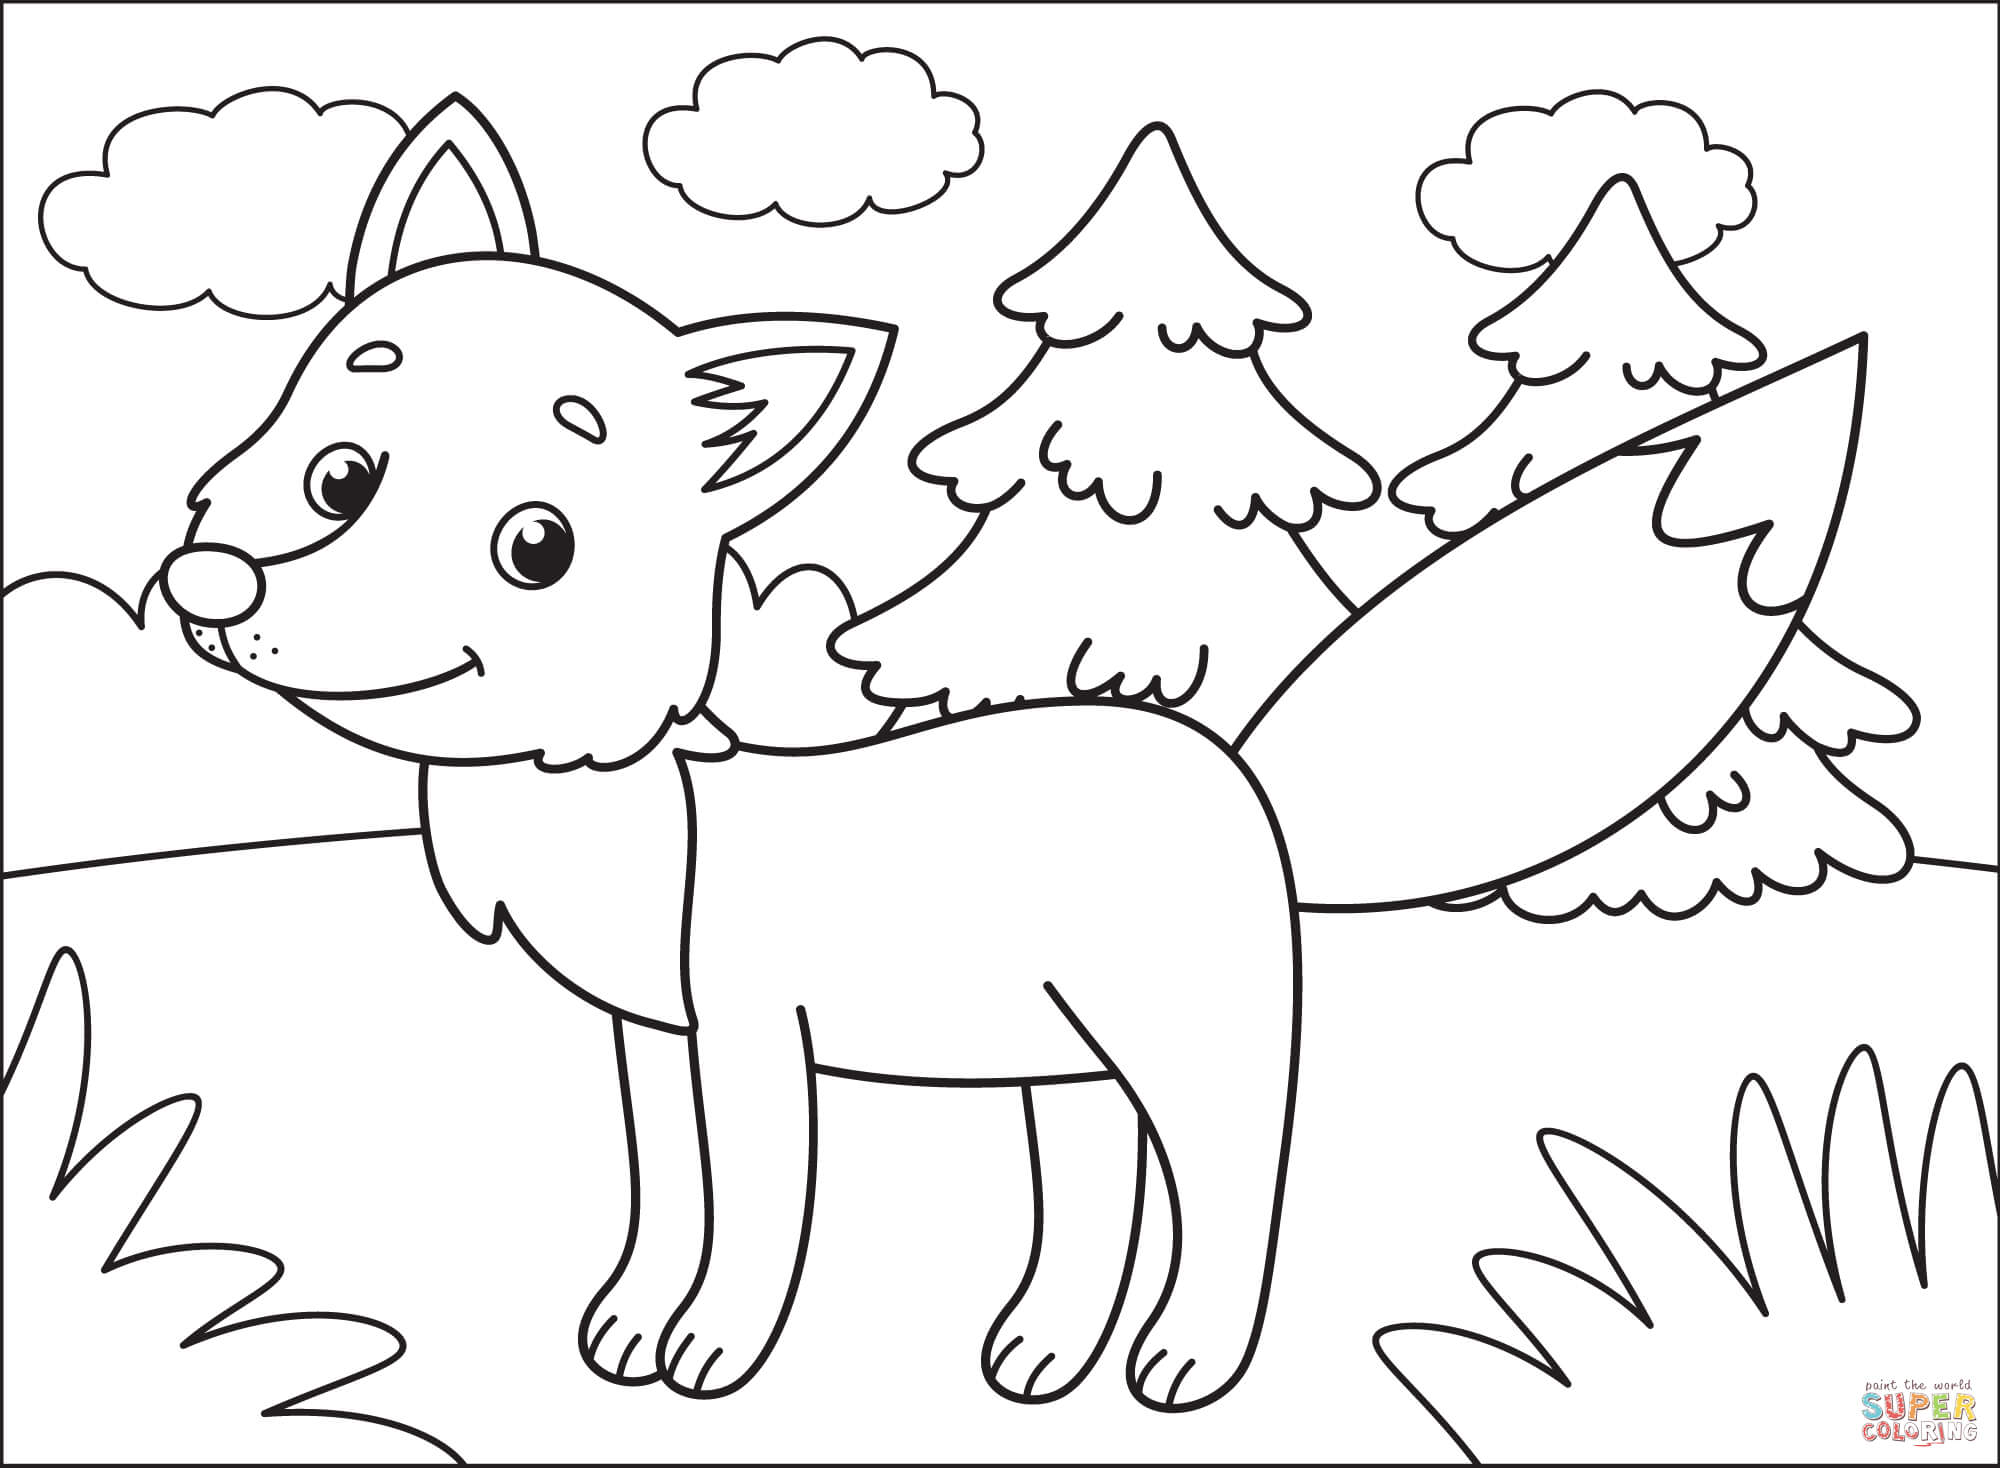 Fox coloring page free printable coloring pages